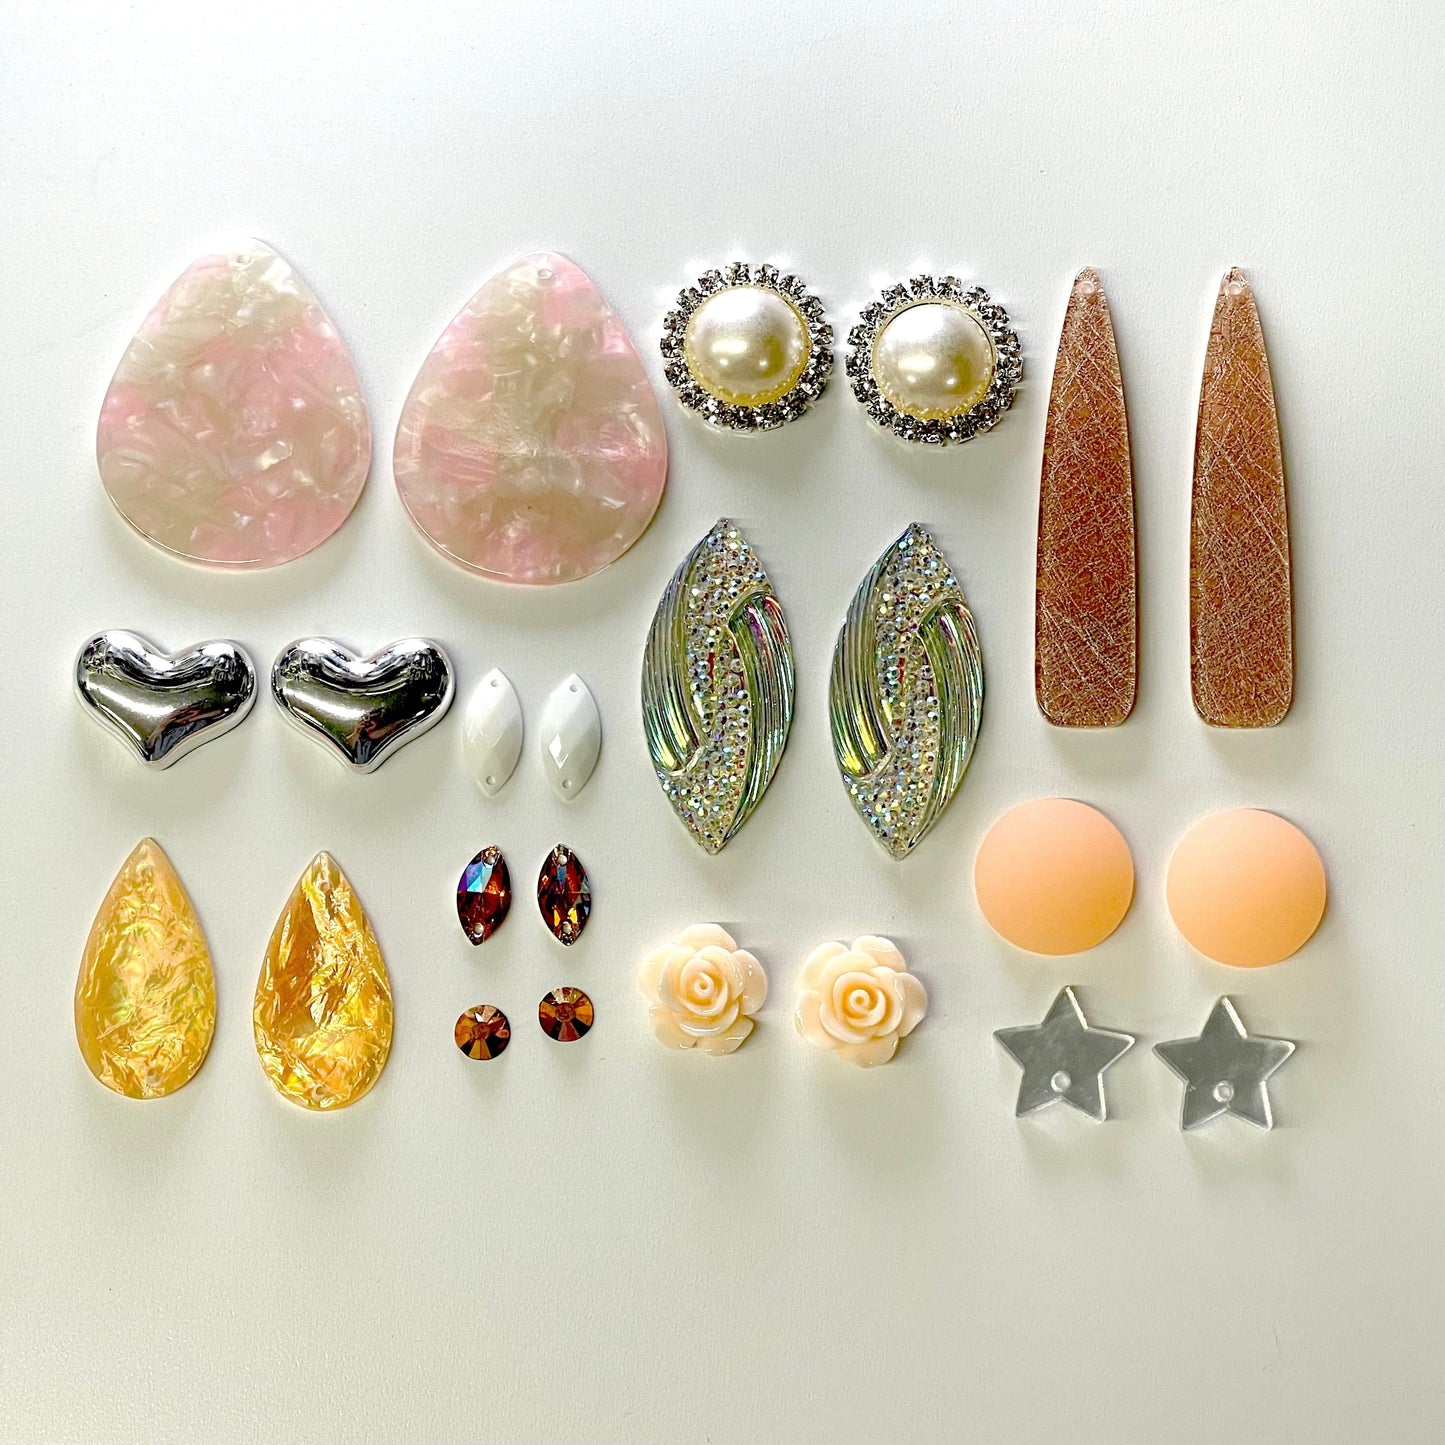 Peach Resin Gem set, Black Friday Special Promotions Promotions